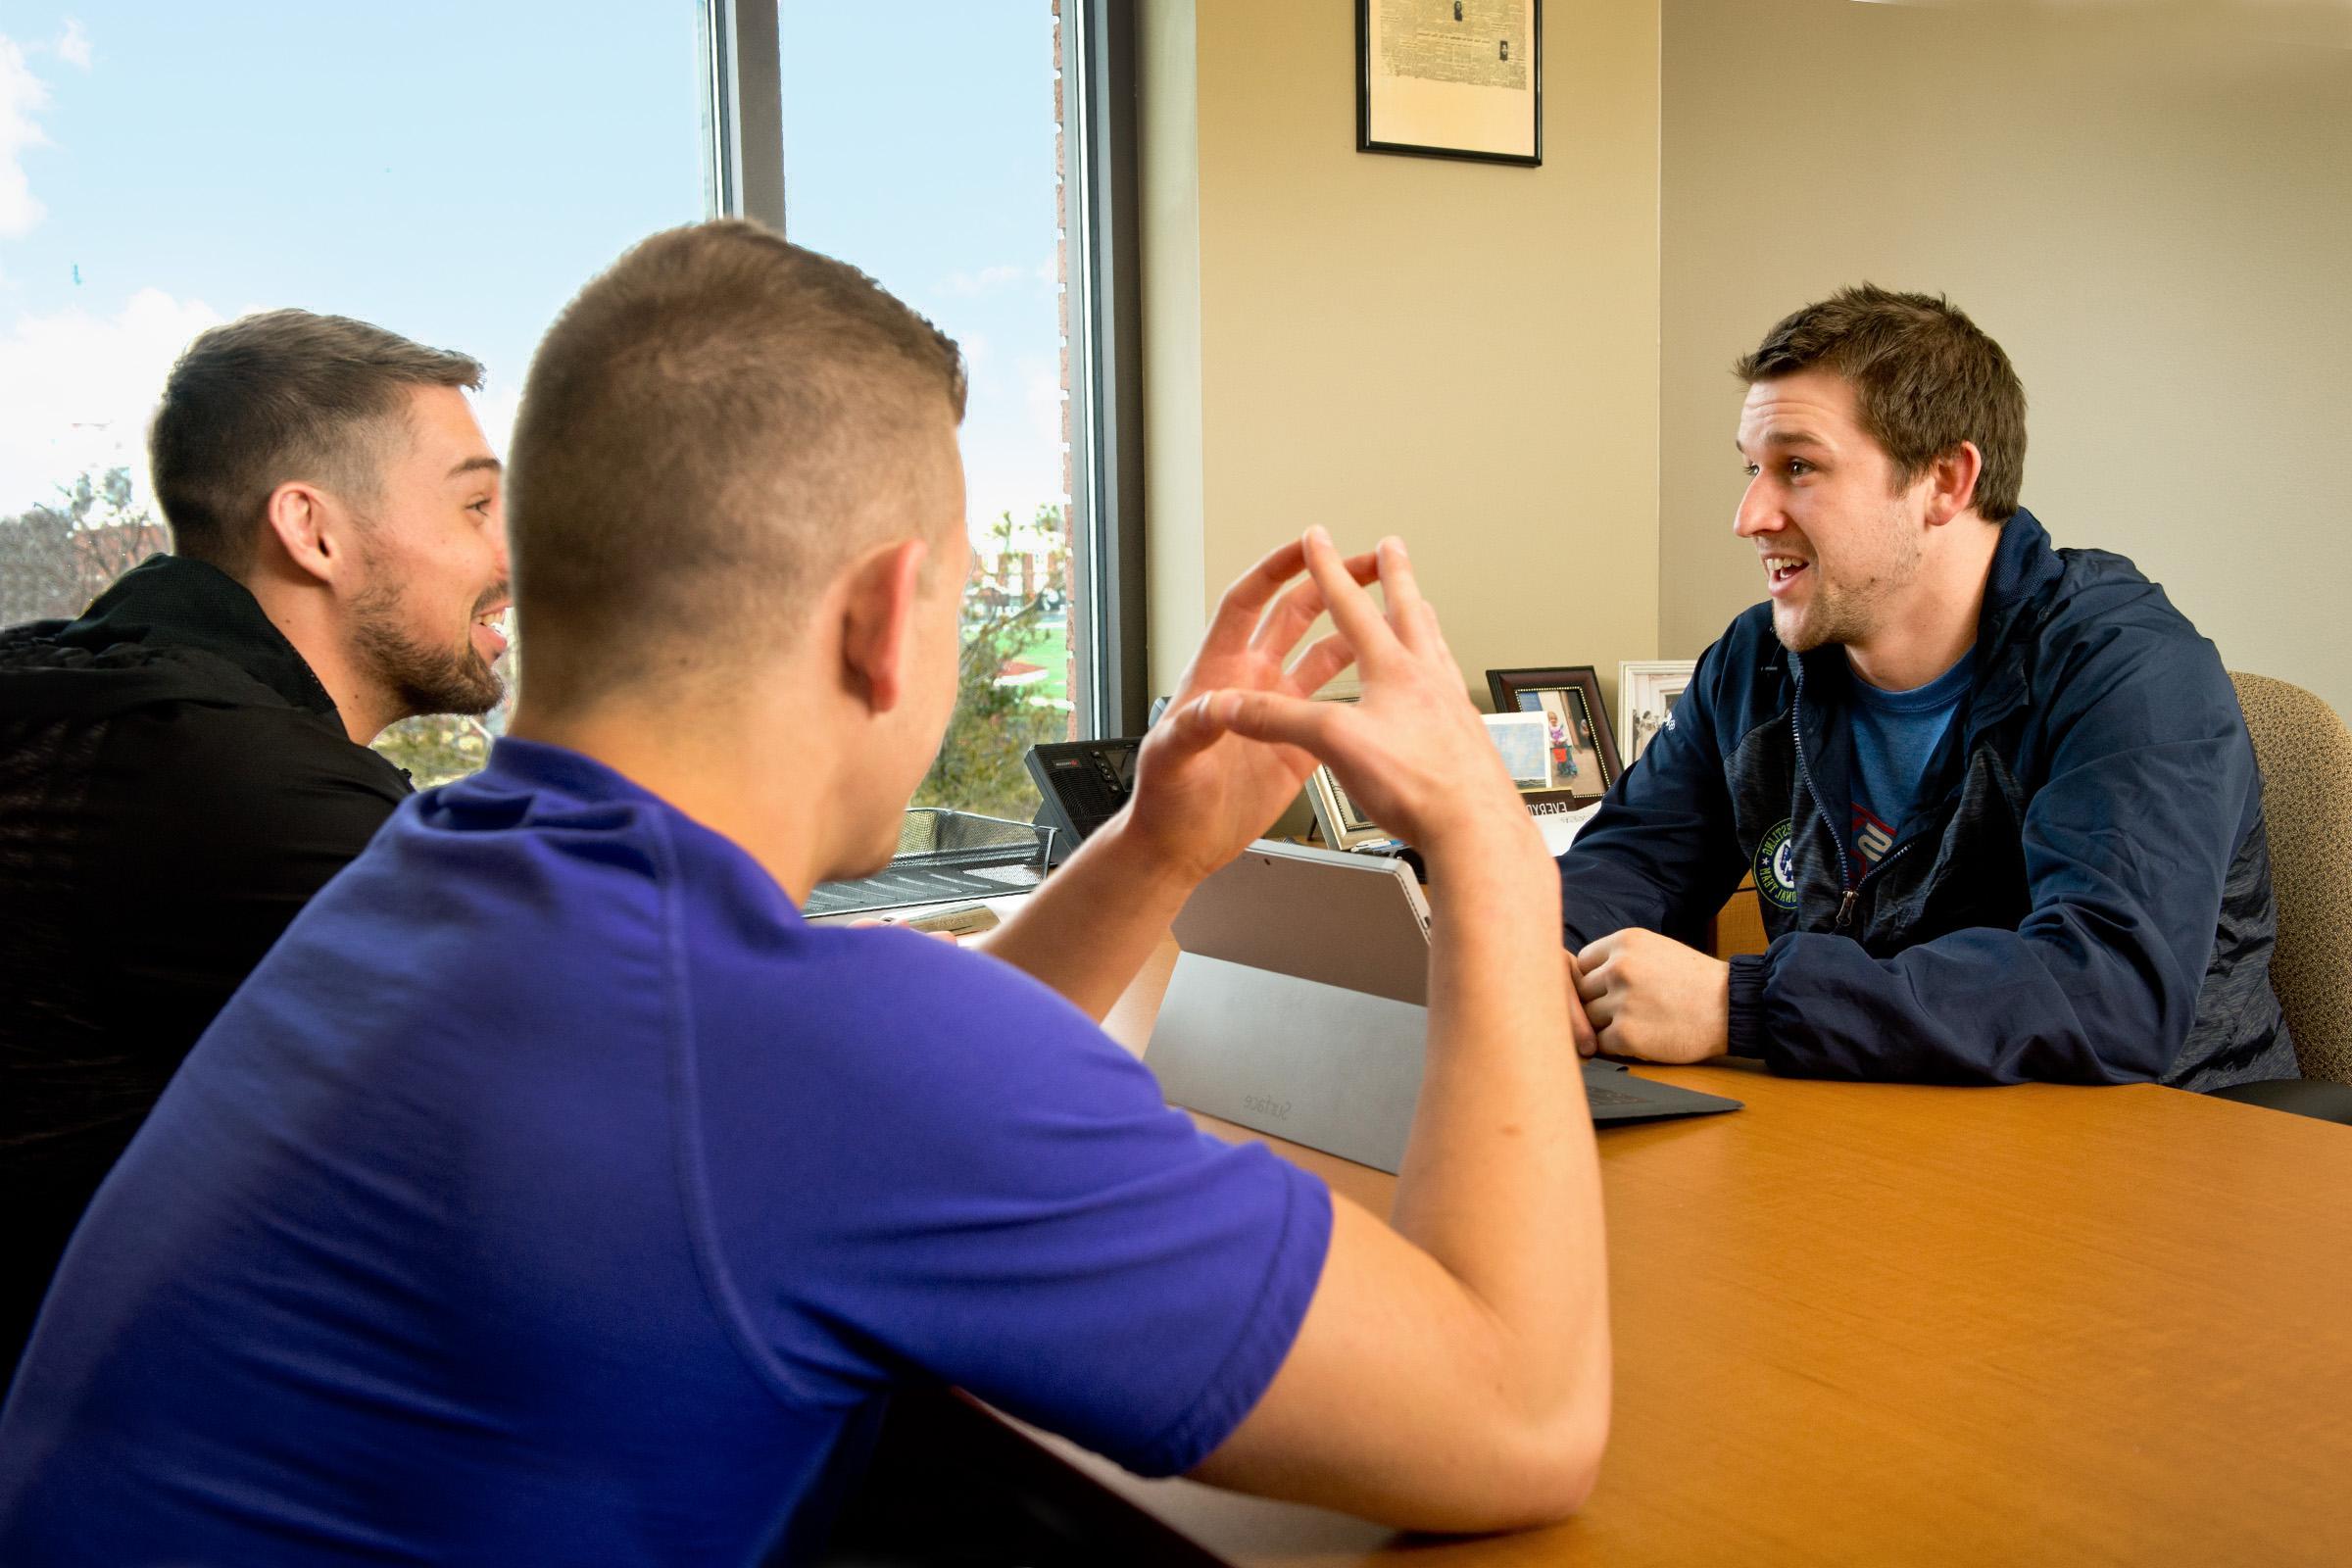 Wrestling coach meeting with athletes in his office.